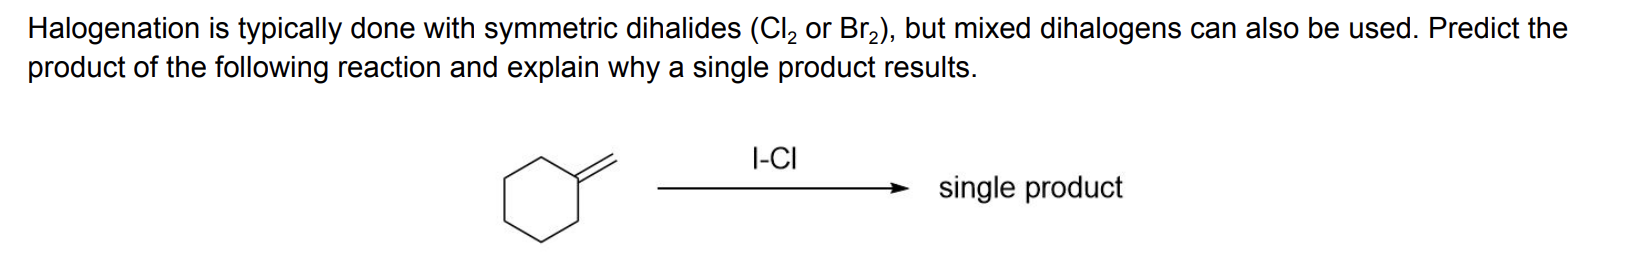 Halogenation is typically done with symmetric dihalides (Cl2 or Br2), but mixed dihalogens can also be used. Predict the
product of the following reaction and explain why a single product results
l-CI
single product
